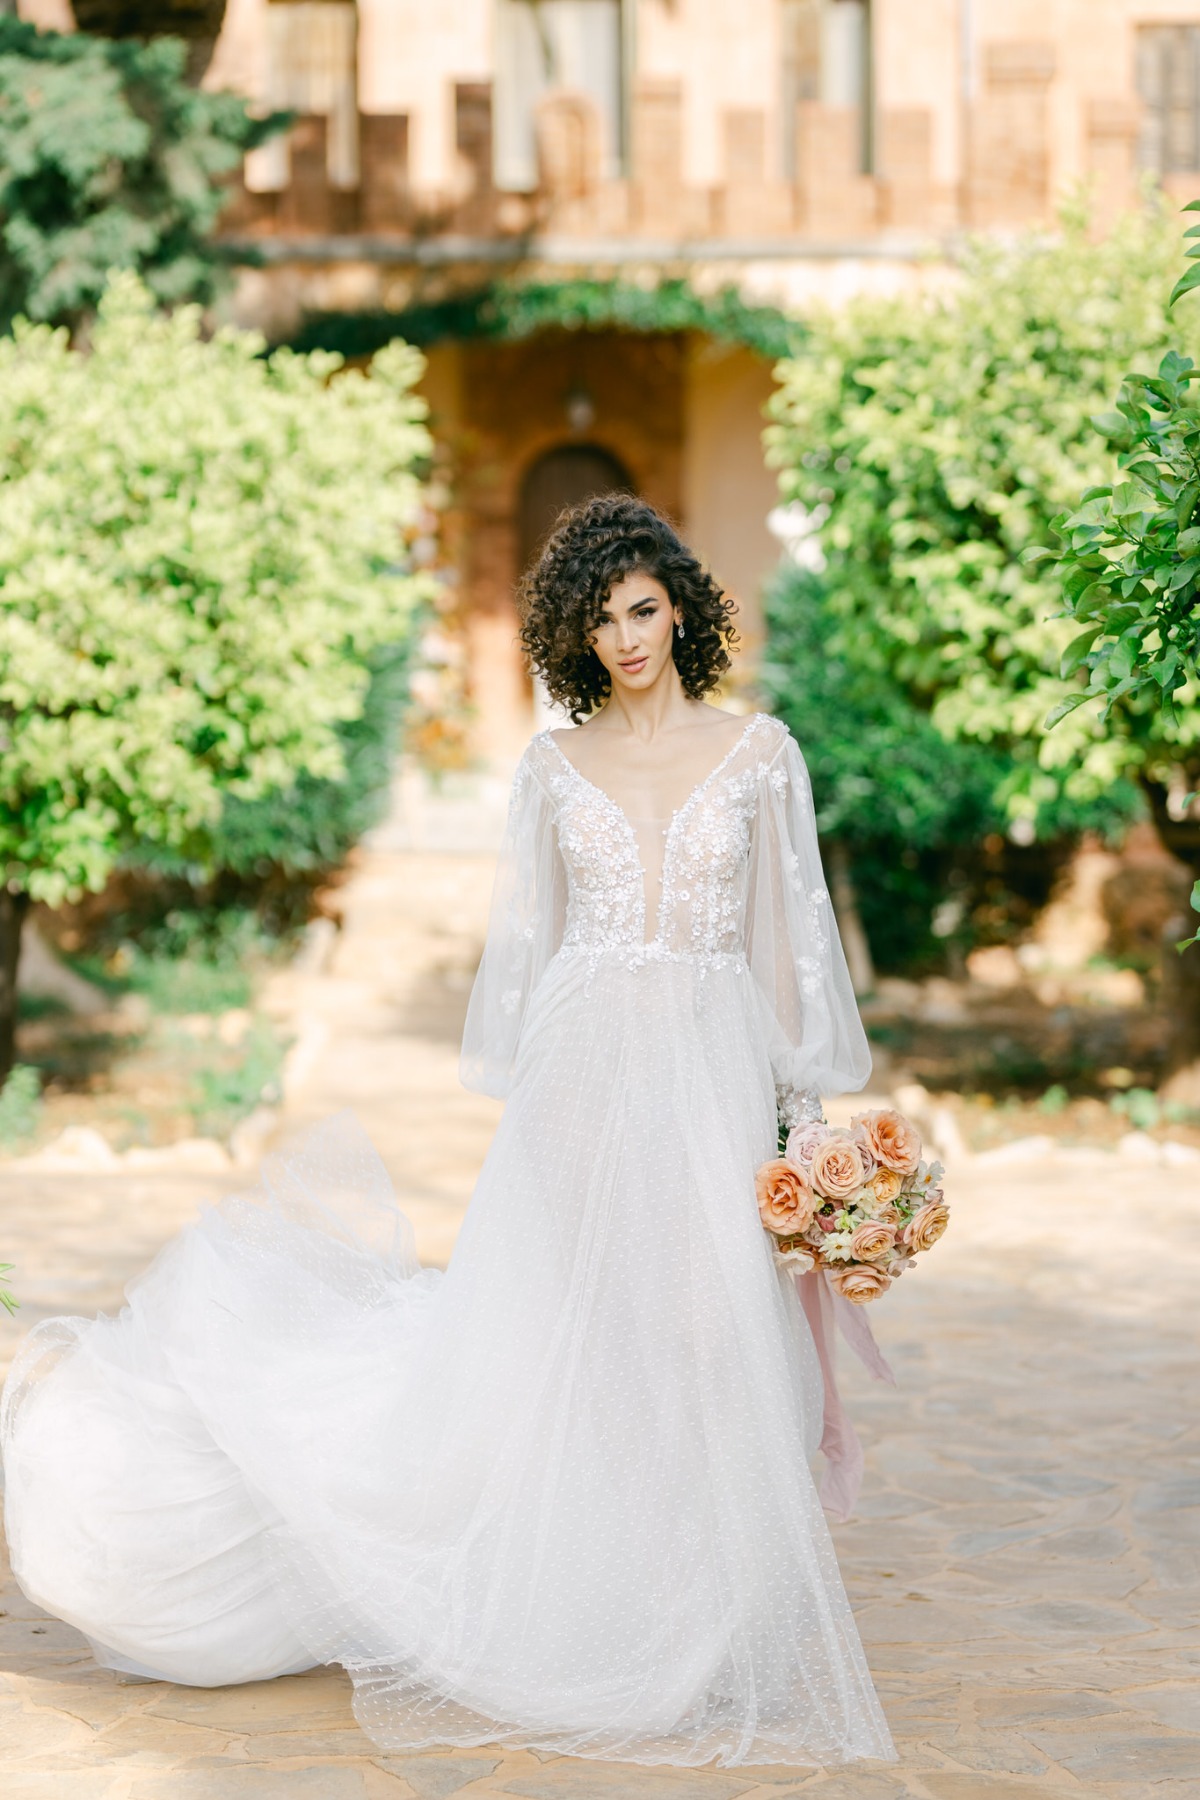 Romantic, sweeping floral wedding gown at Athens wedding